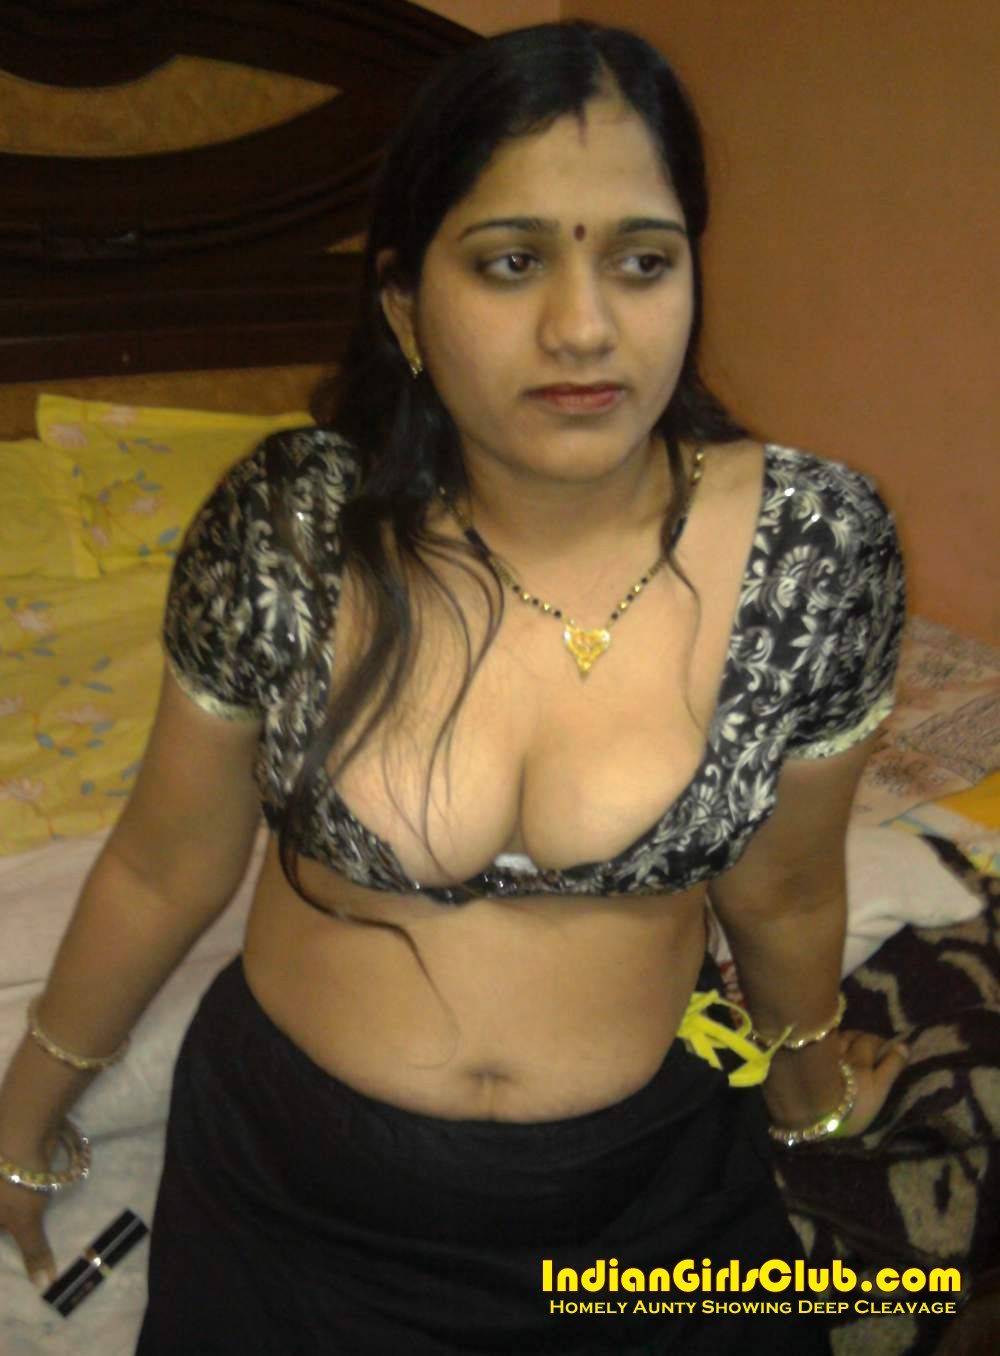 Indian house wife hip adult photo. Adult trends archive FREE